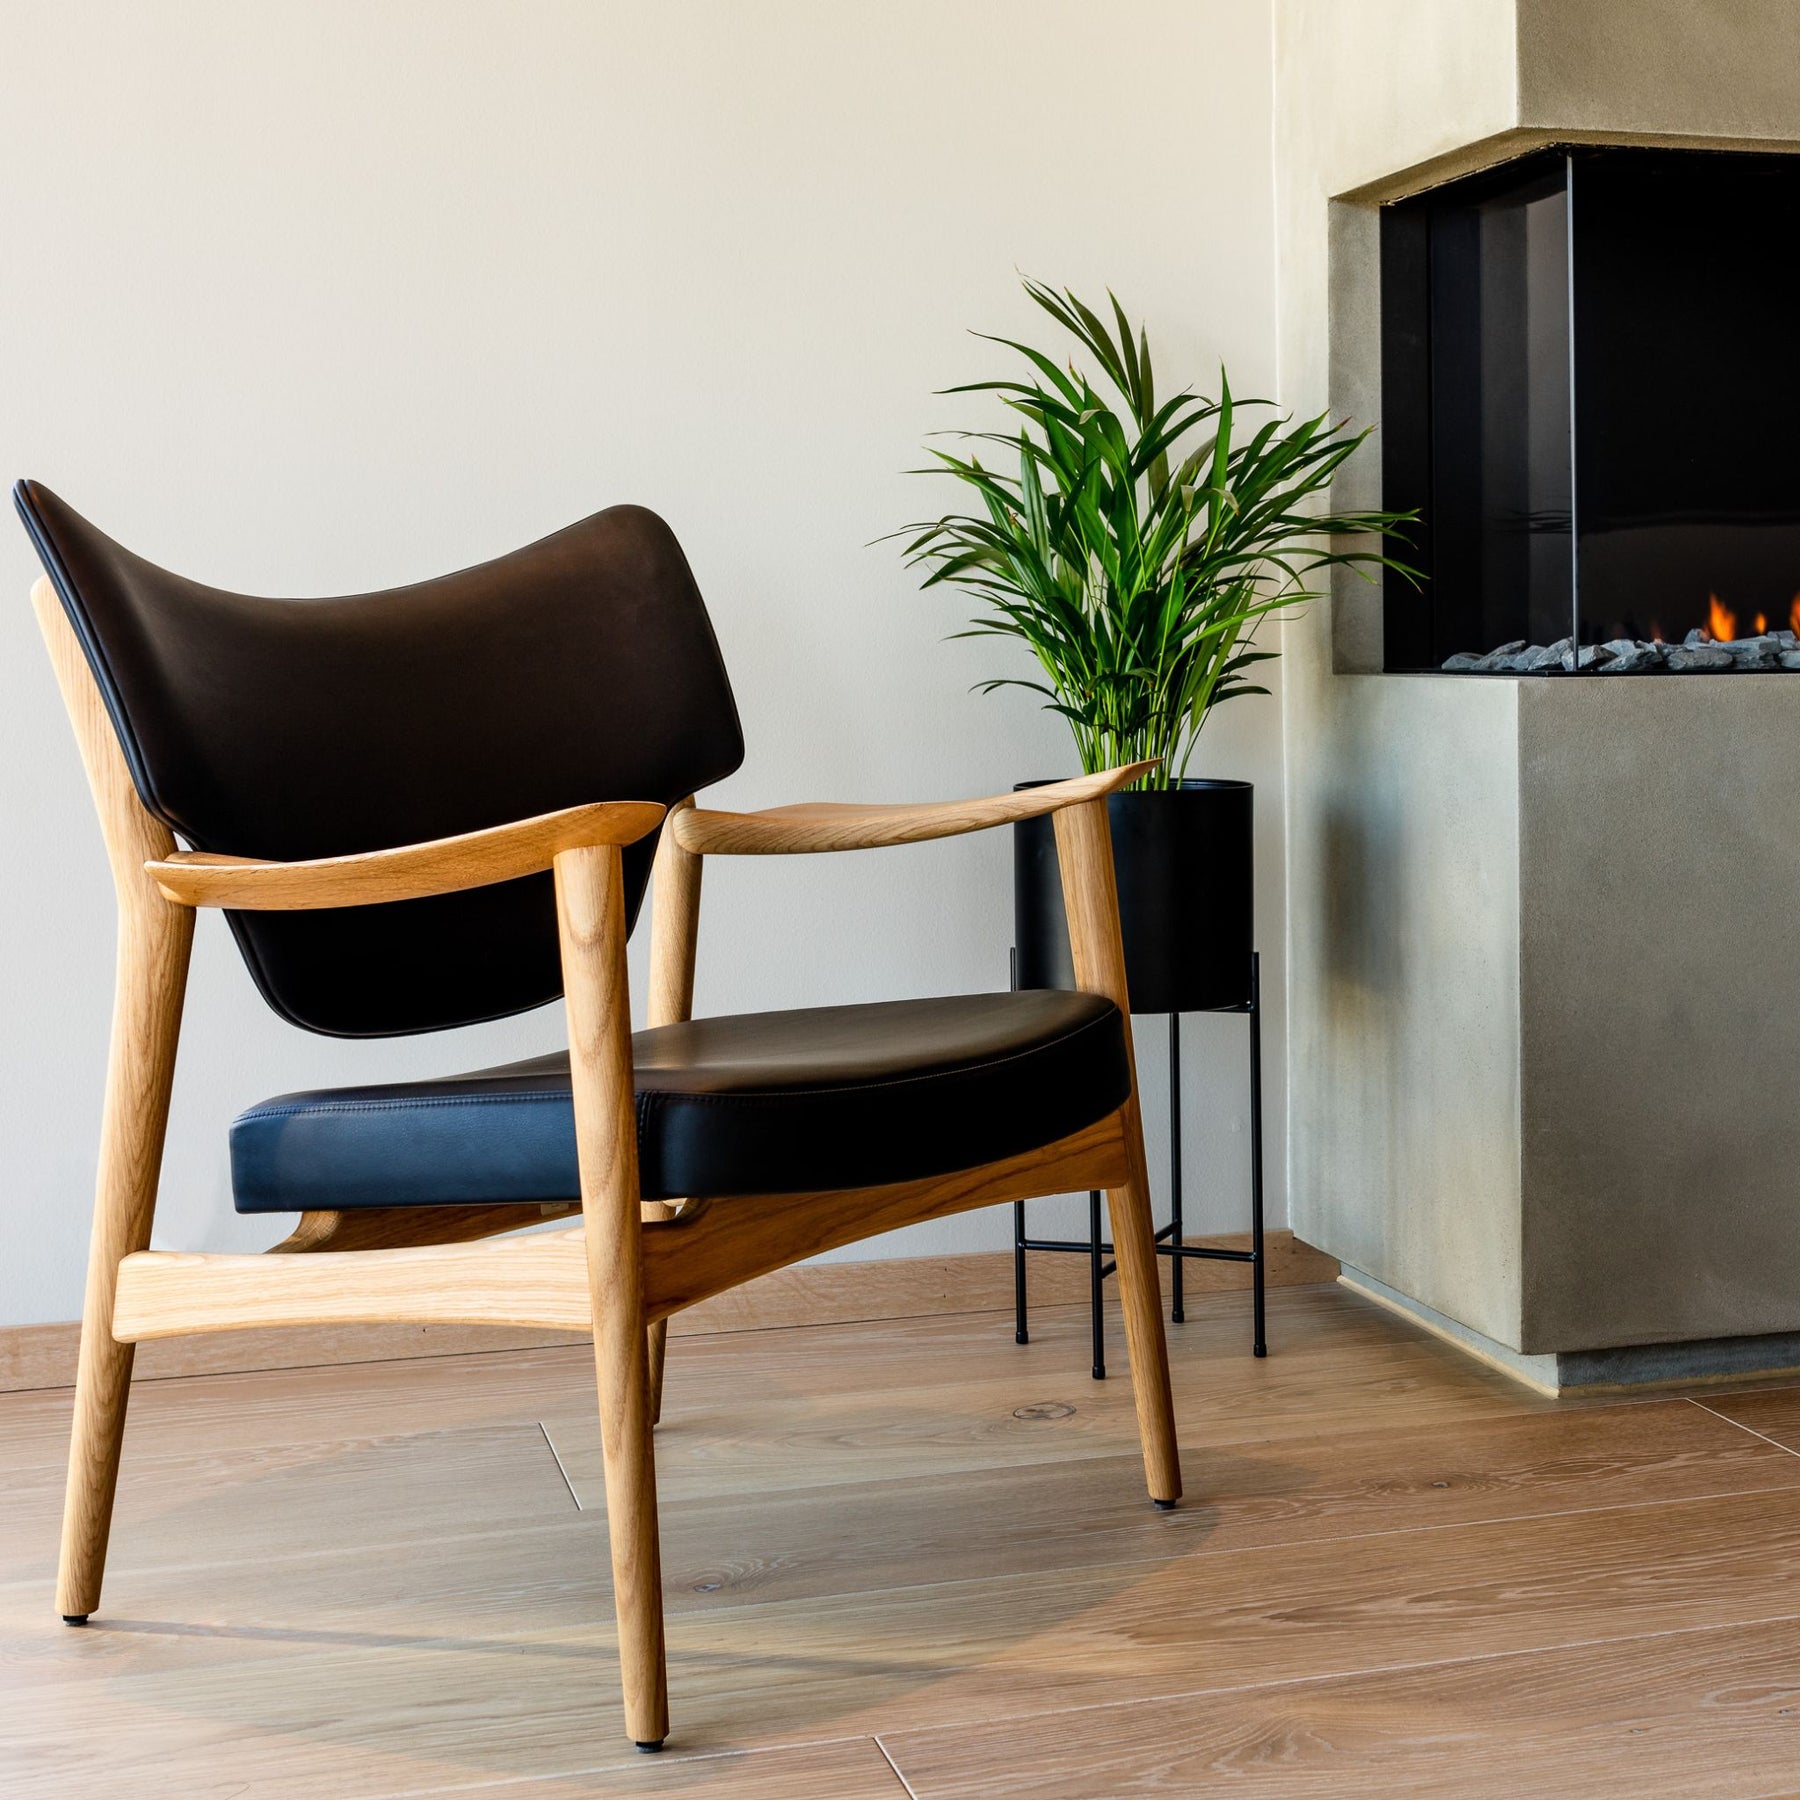 Eikund Veng Lounge Chair Oak with Black Leather in Living Room with Plant by Fireplace